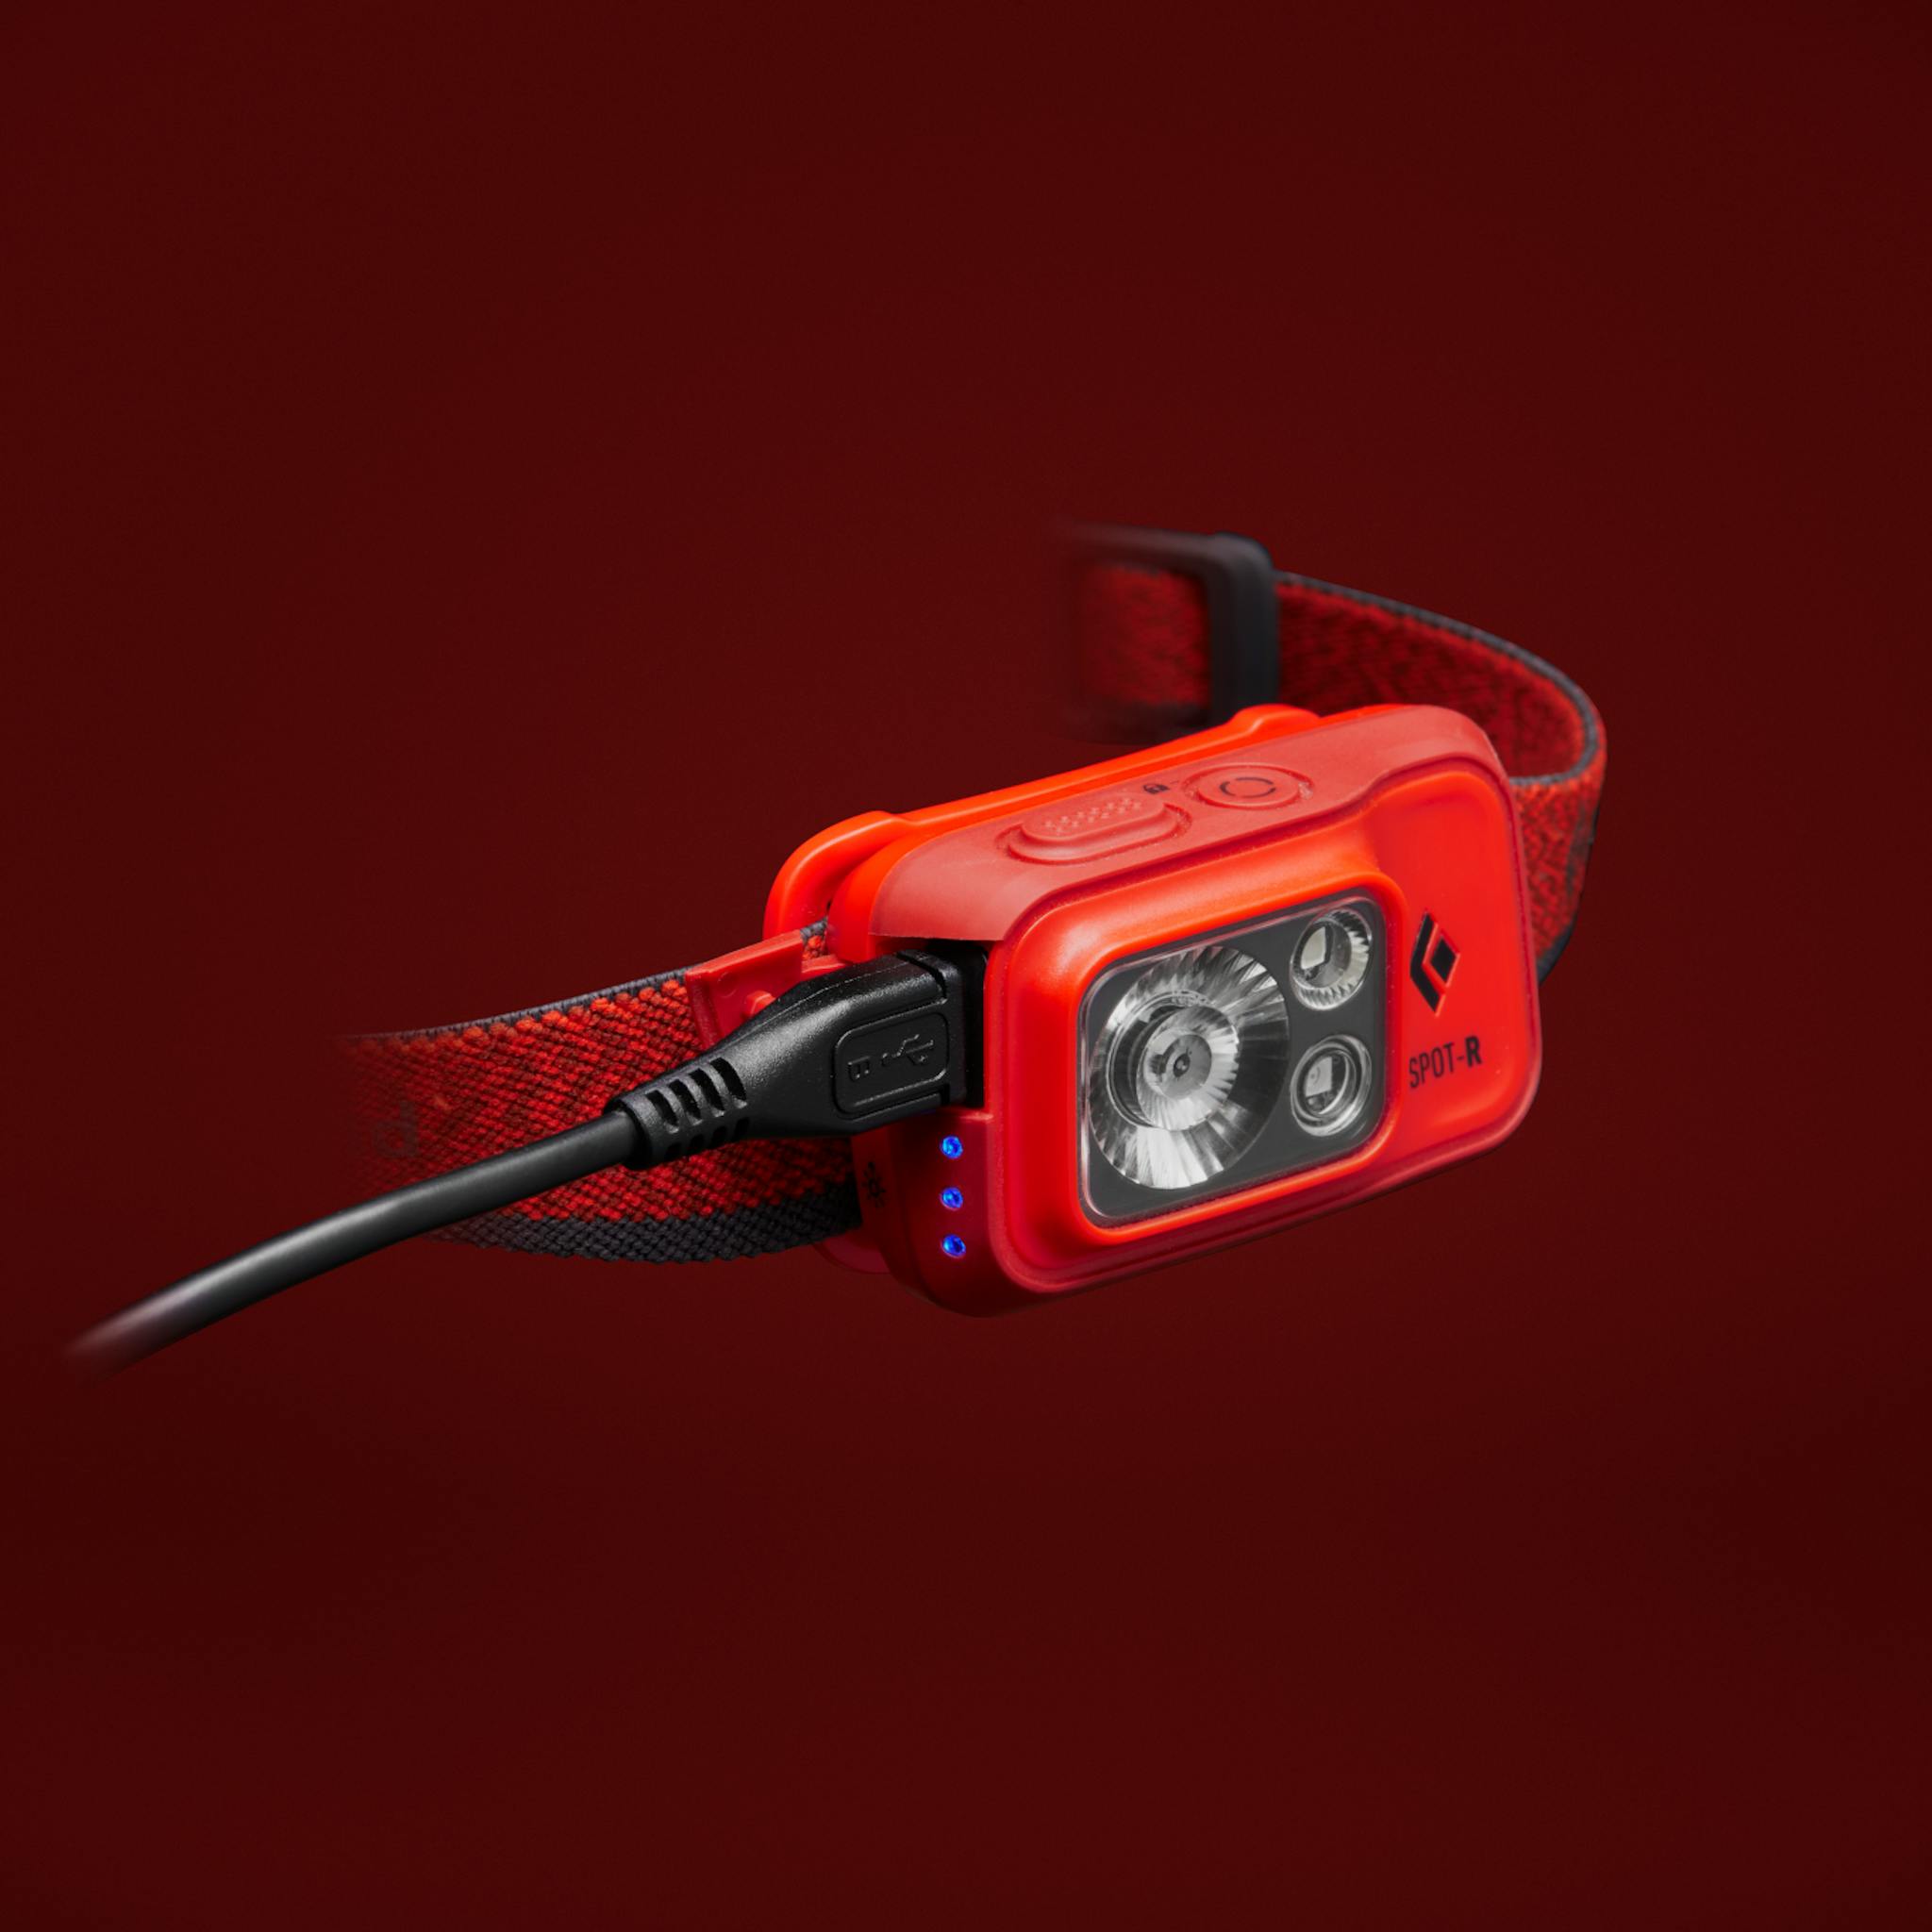 A red Spot 400 R Headlamp plugged into a micro USB